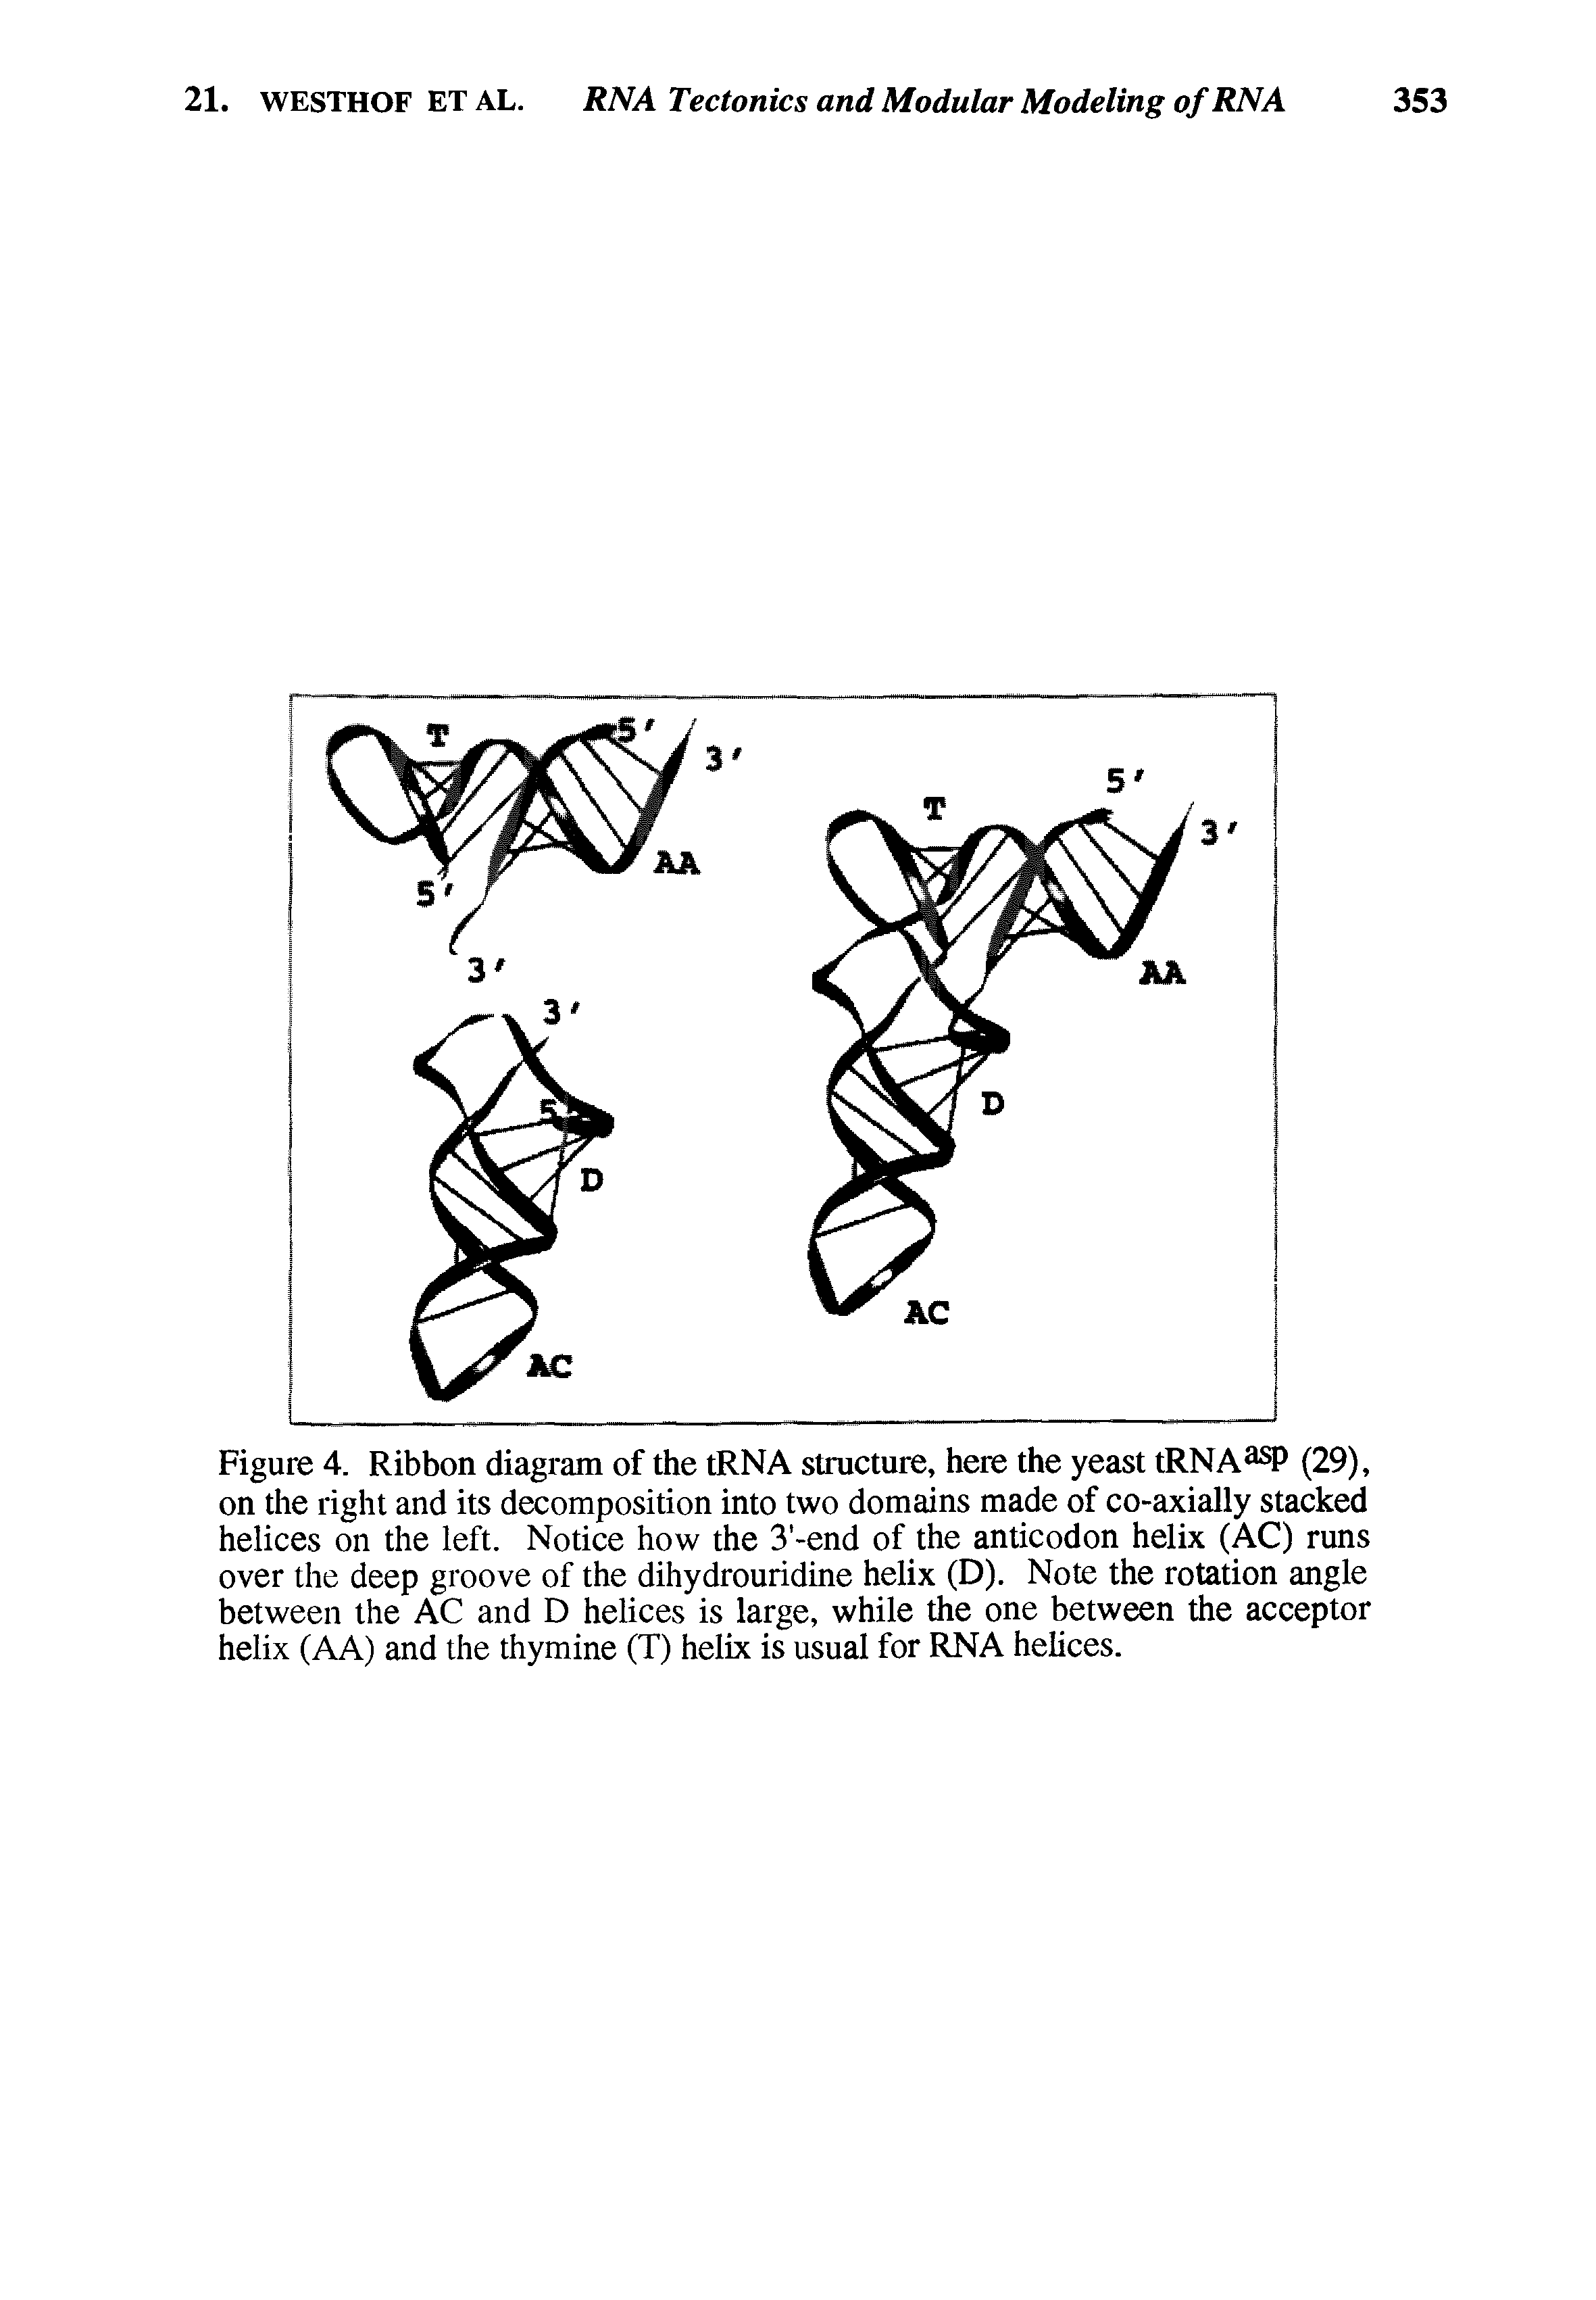 Figure 4. Ribbon diagram of the tRNA structure, here the yeast tRNA (29), on the right and its decomposition into two domains made of co-axially stacked helices on the left. Notice how the 3 -end of the anticodon helix (AC) runs over the deep groove of the dihydrouridine helix (D). Note the rotation angle between the AC and D helices is large, while the one between the acceptor helix (AA) and the thymine (T) helix is usual for RNA helices.